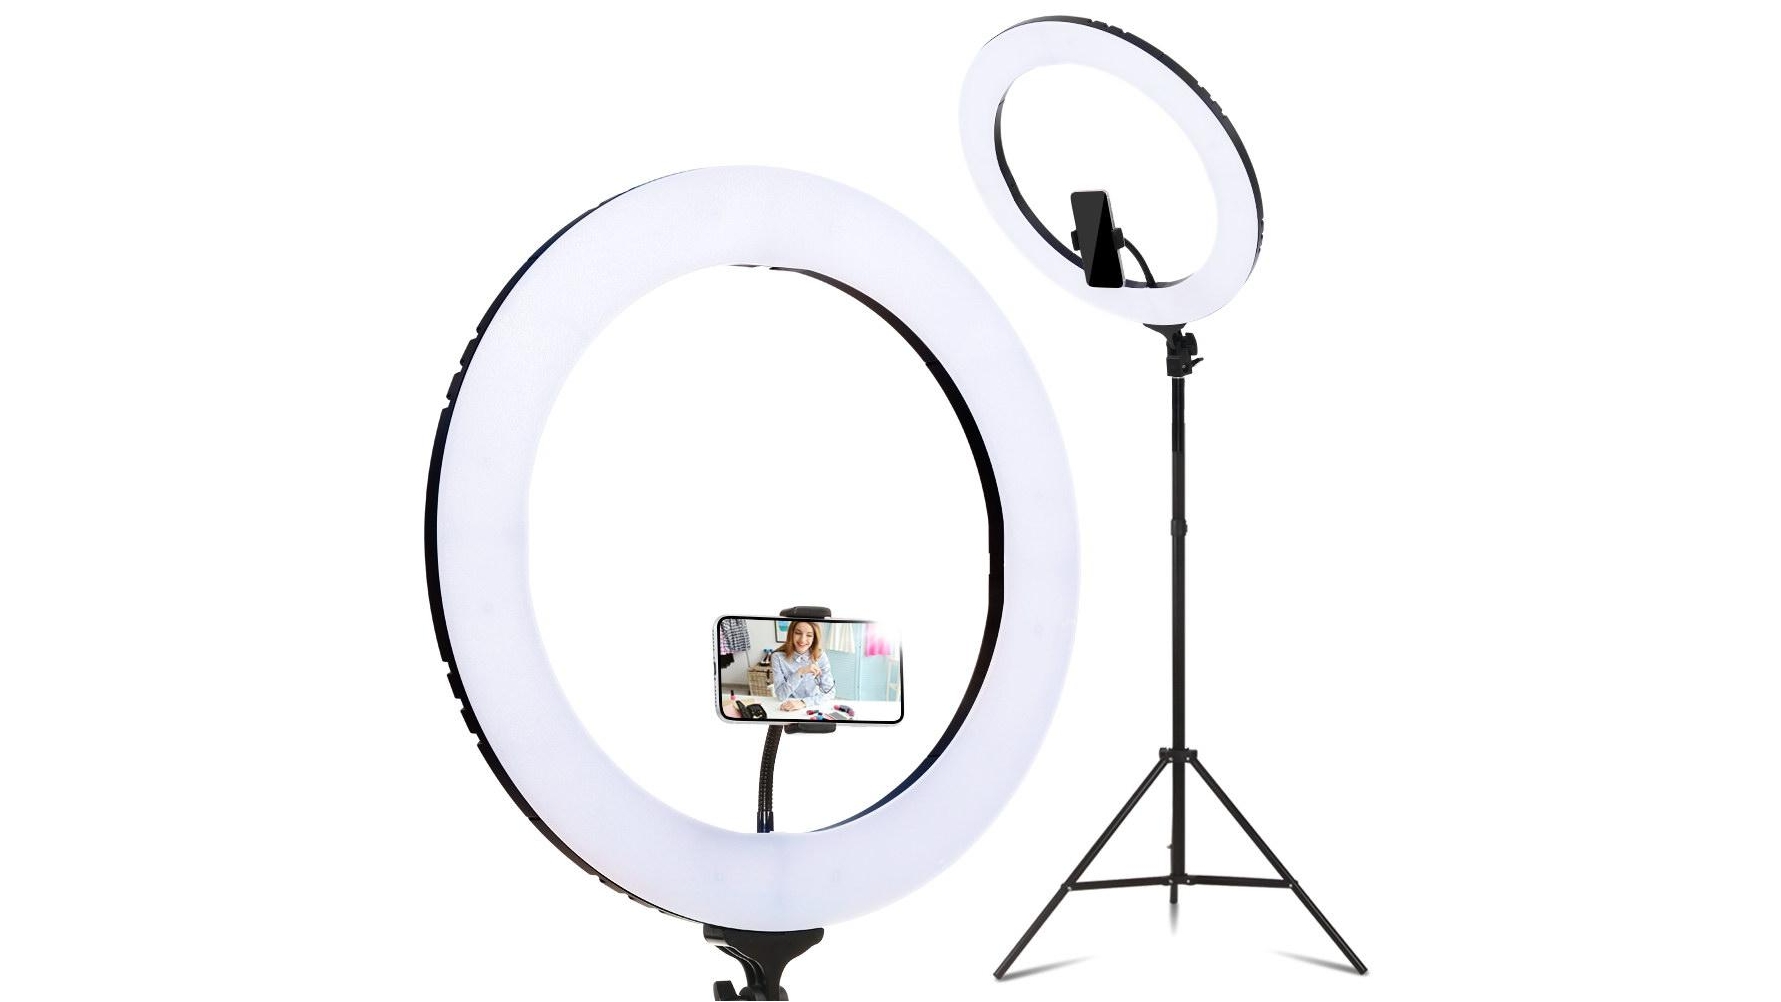 Lighting Equipment Ring Light Carrying Bag 13.8x13.8x2.4 inches for Light Stand Tripod LED Light and Other Accessories 